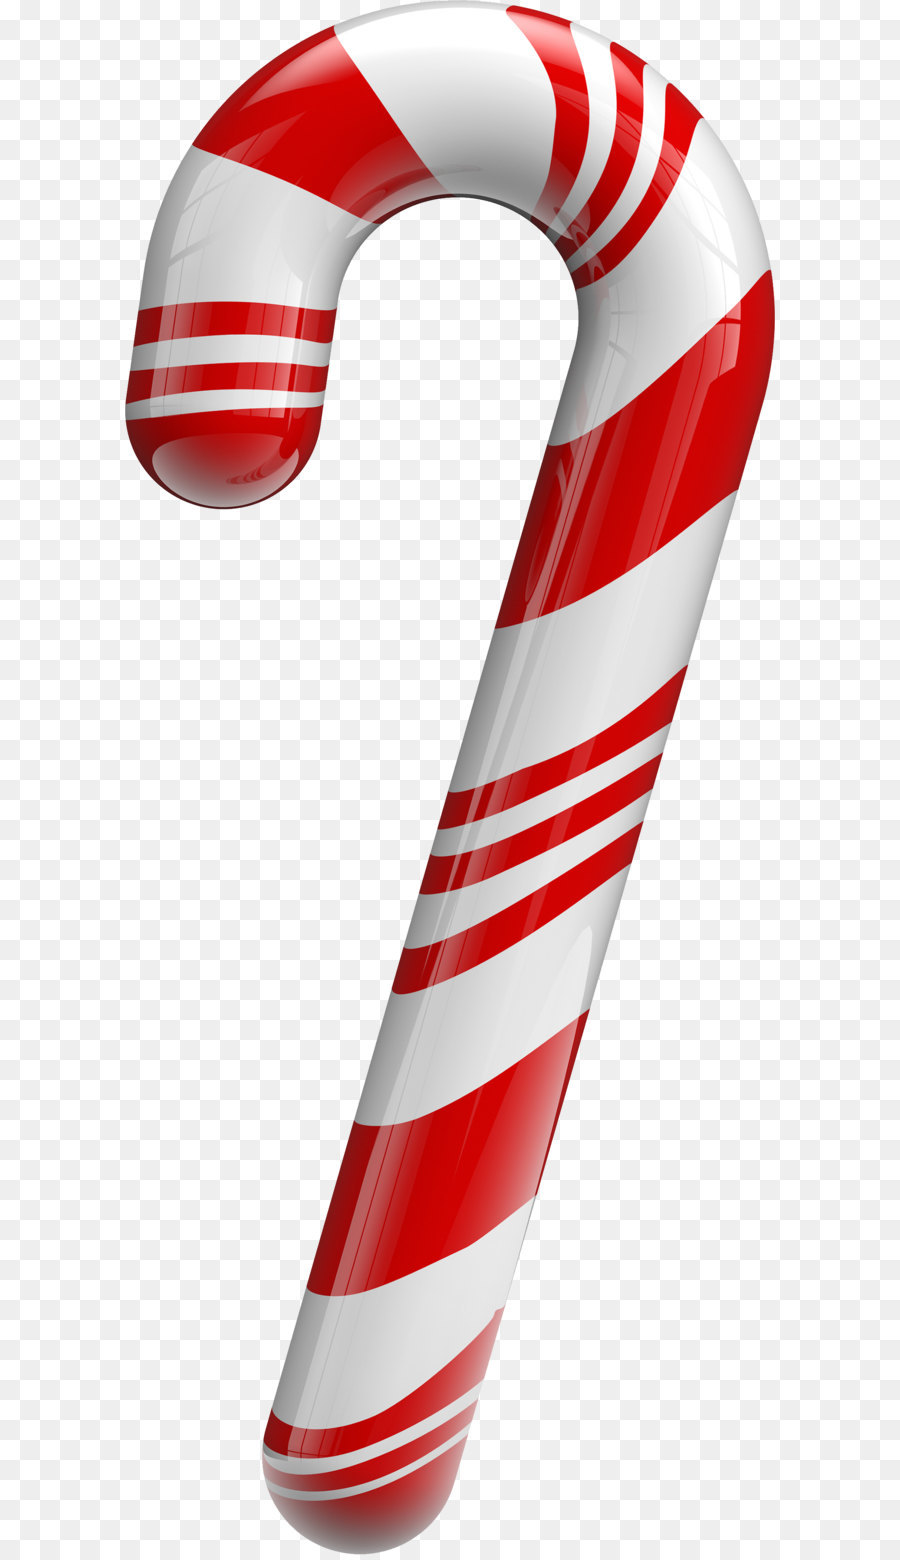 Candy cane Lollipop Christmas Clip art - Christmas decorations, candy canes, free pick ups, free downloads png download - 1464*3503 - Free Transparent Candy Cane png Download.